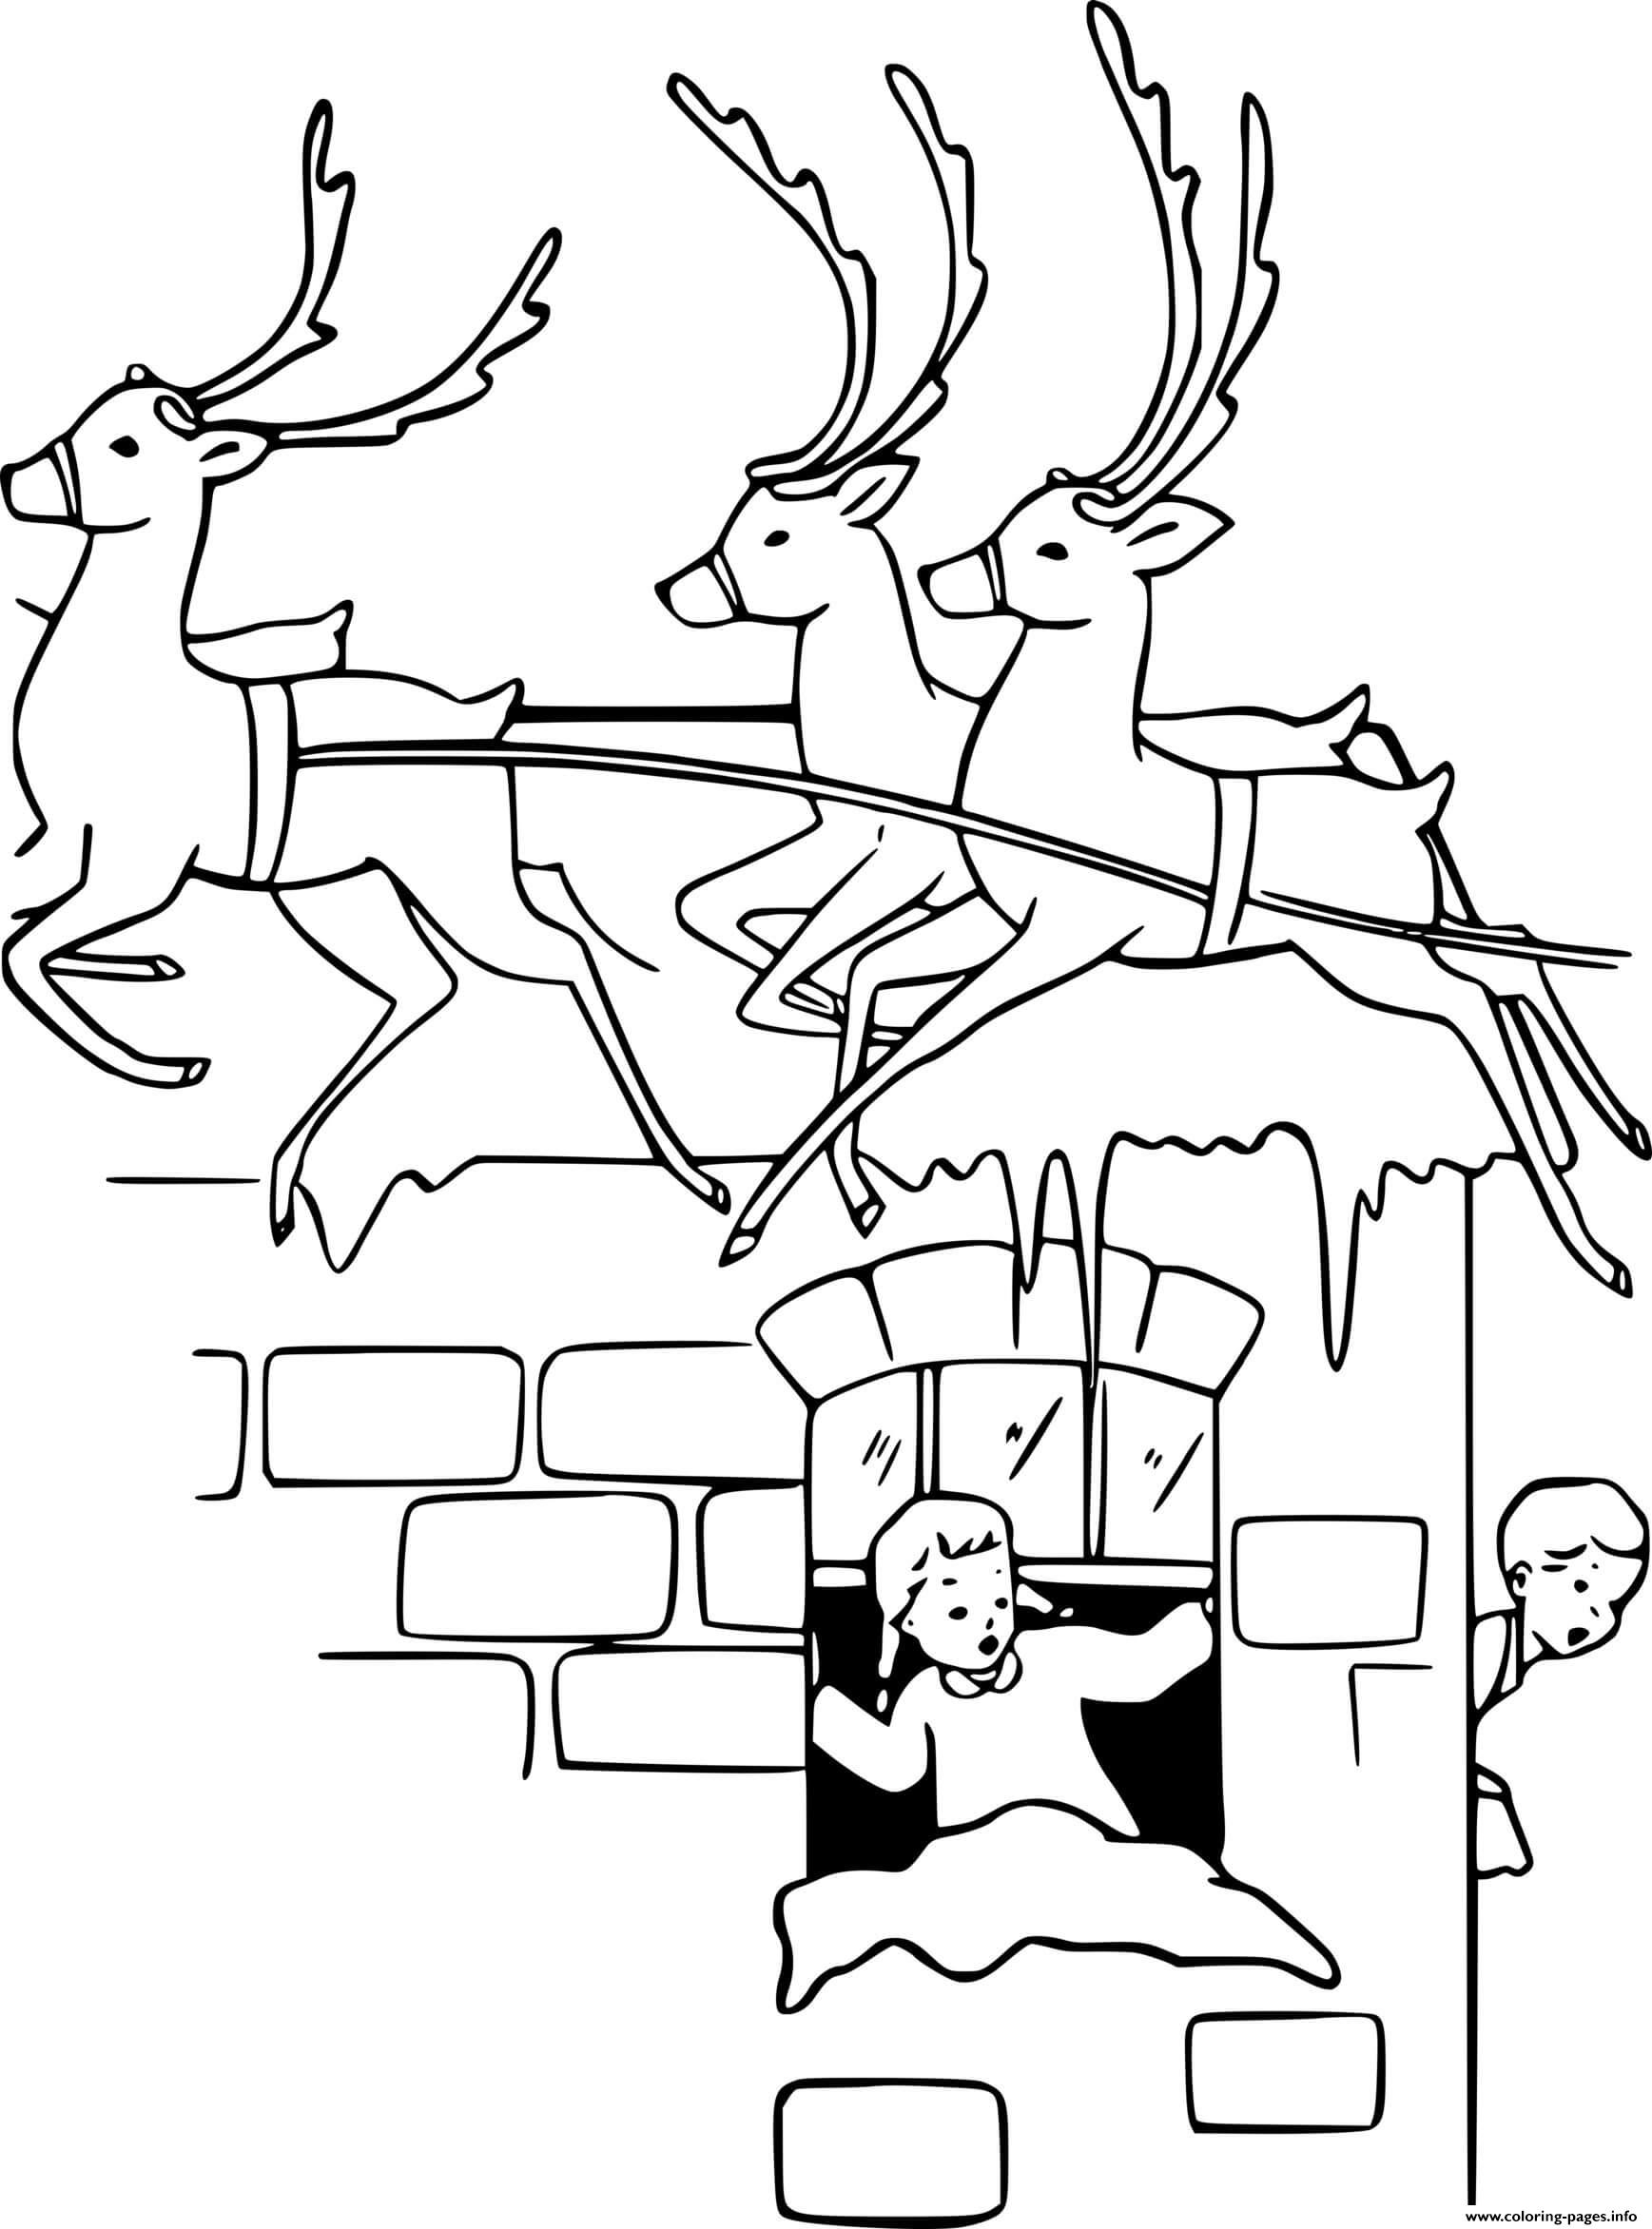 Reindeer Flying Over The Roof coloring